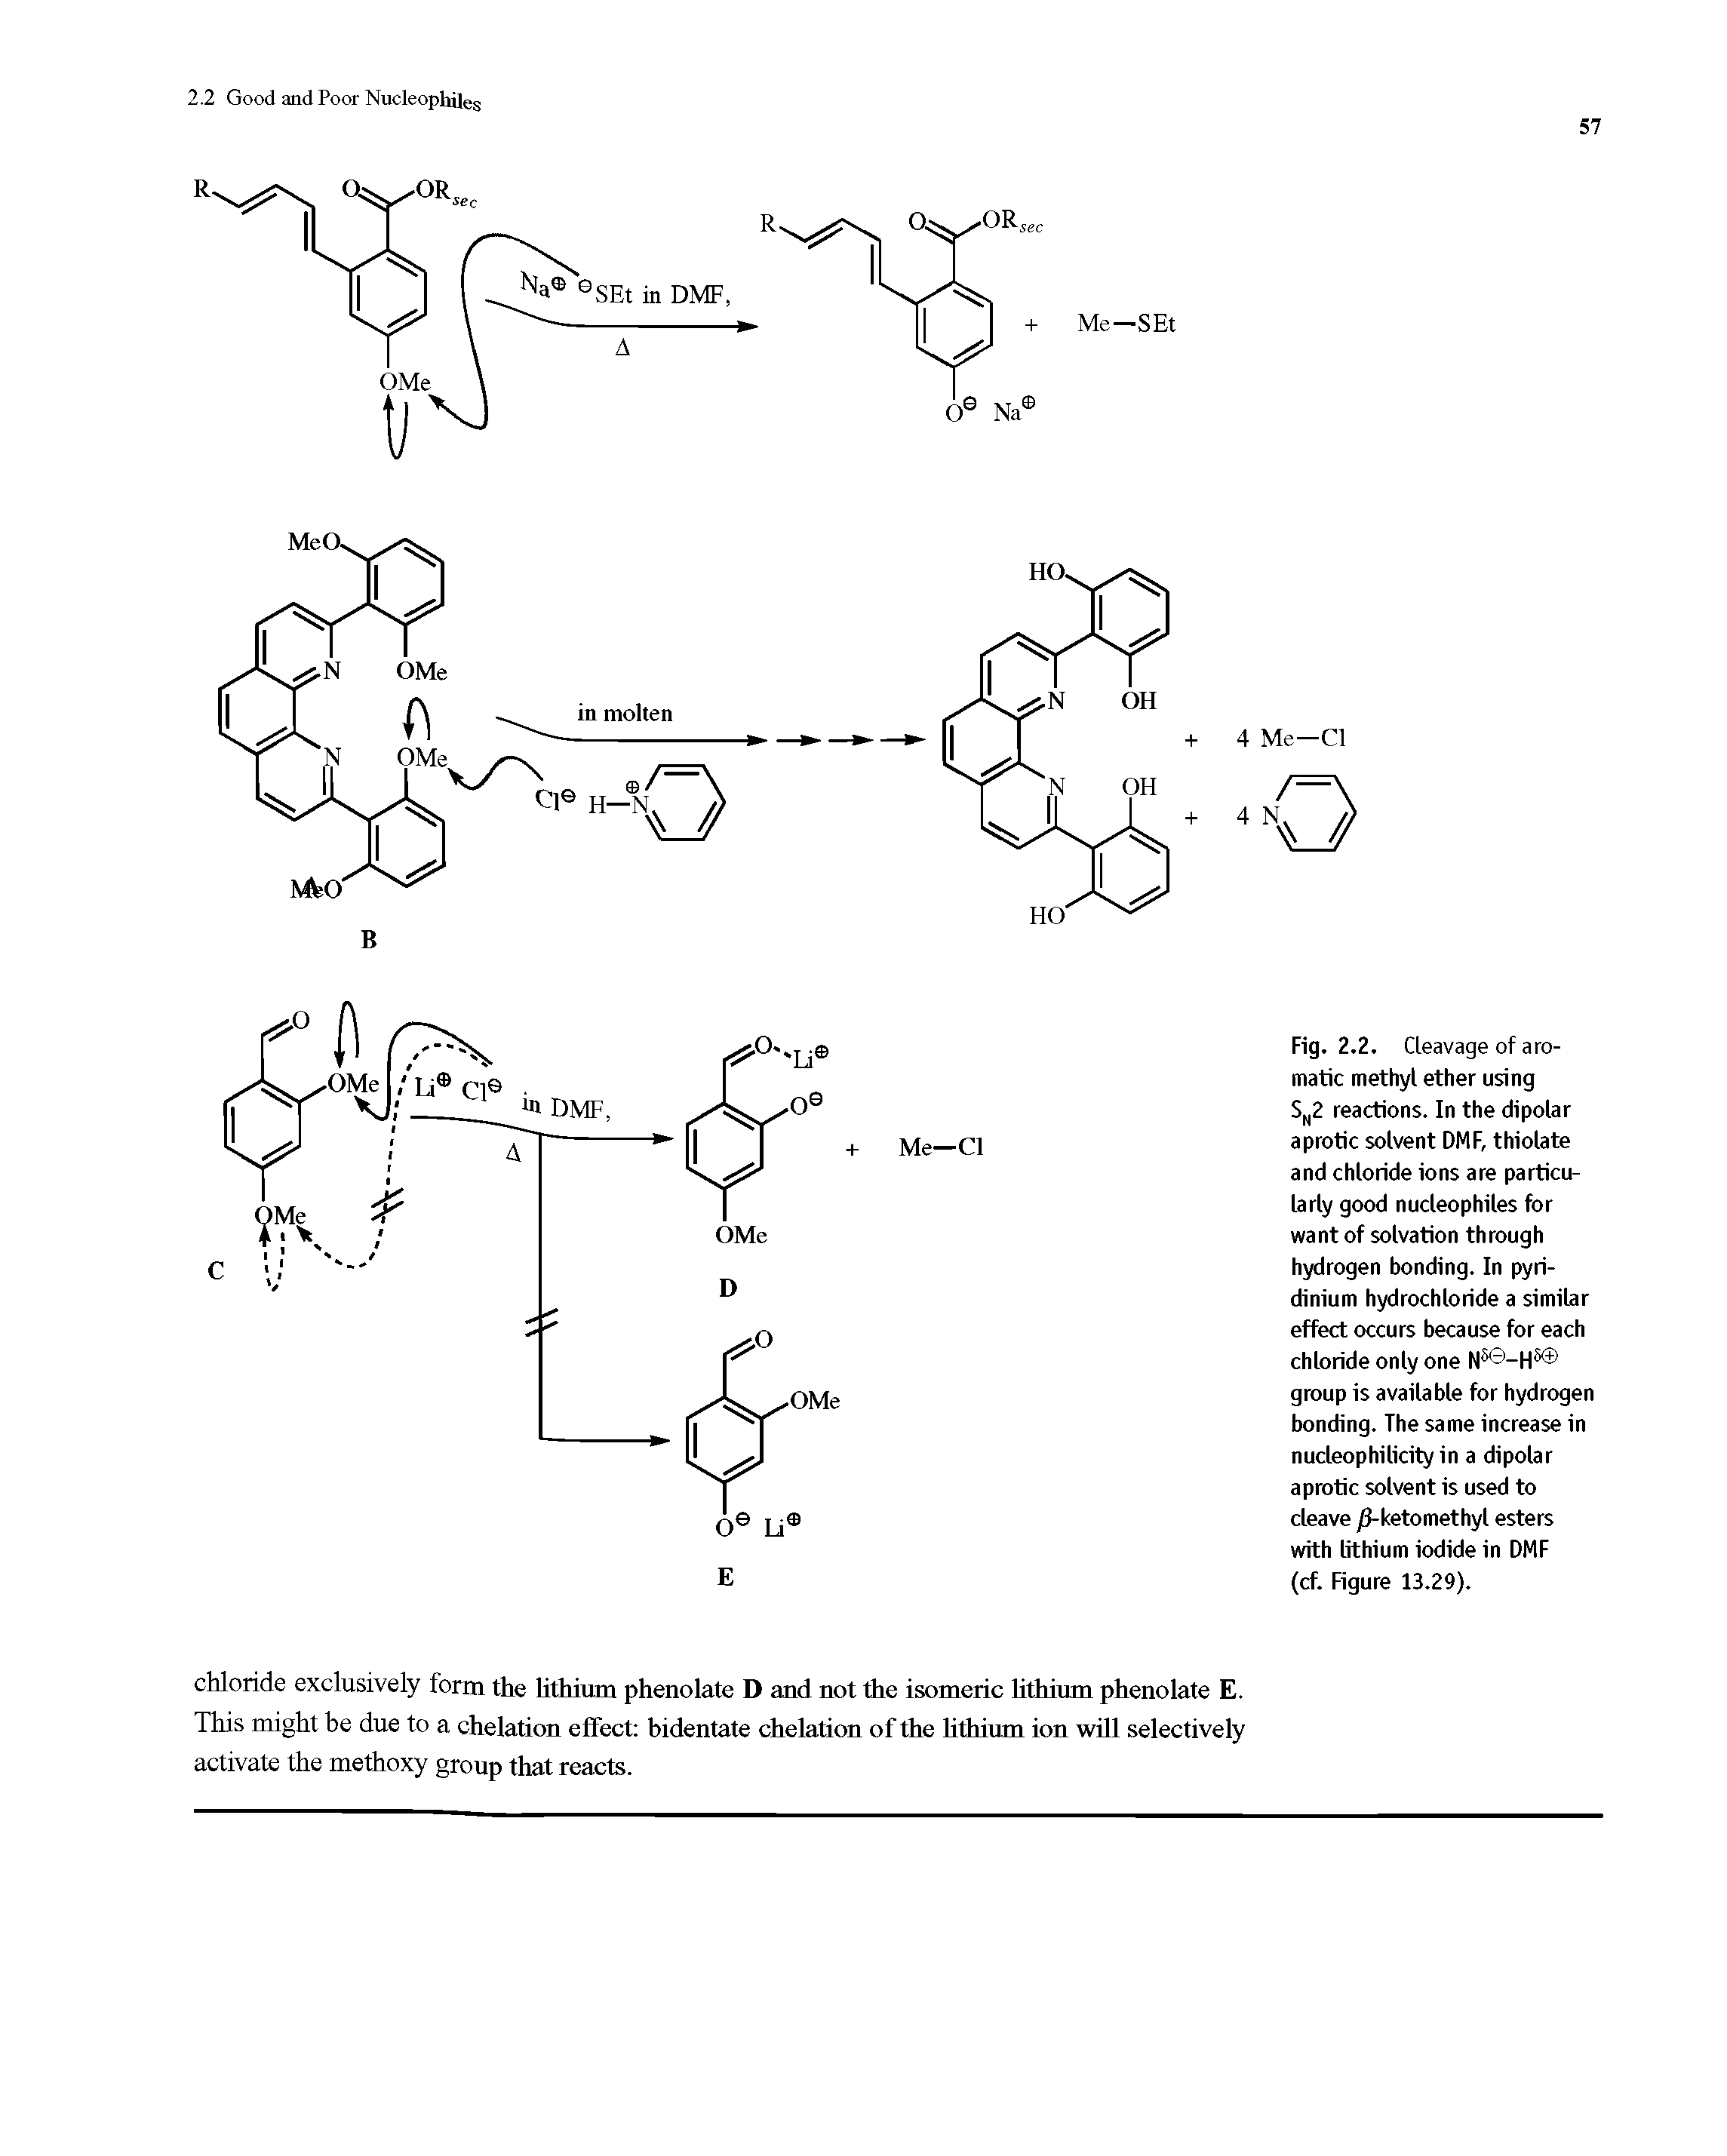 Fig. 2.2. Cleavage of aromatic methyl ether using Sn2 reactions. In the dipolar aprotic solvent DMF, thiolate and chloride ions are particularly good nucleophiles for want of solvation through hydrogen bonding. In pyri-dinium hydrochloride a similar effect occurs because for each chloride only one N5 —H5 group is available for hydrogen bonding. The same increase in nucleophilicityin a dipolar aprotic solvent is used to cleave /i-ketomethyl esters with lithium iodide in DMF (cf. Figure 13.29).